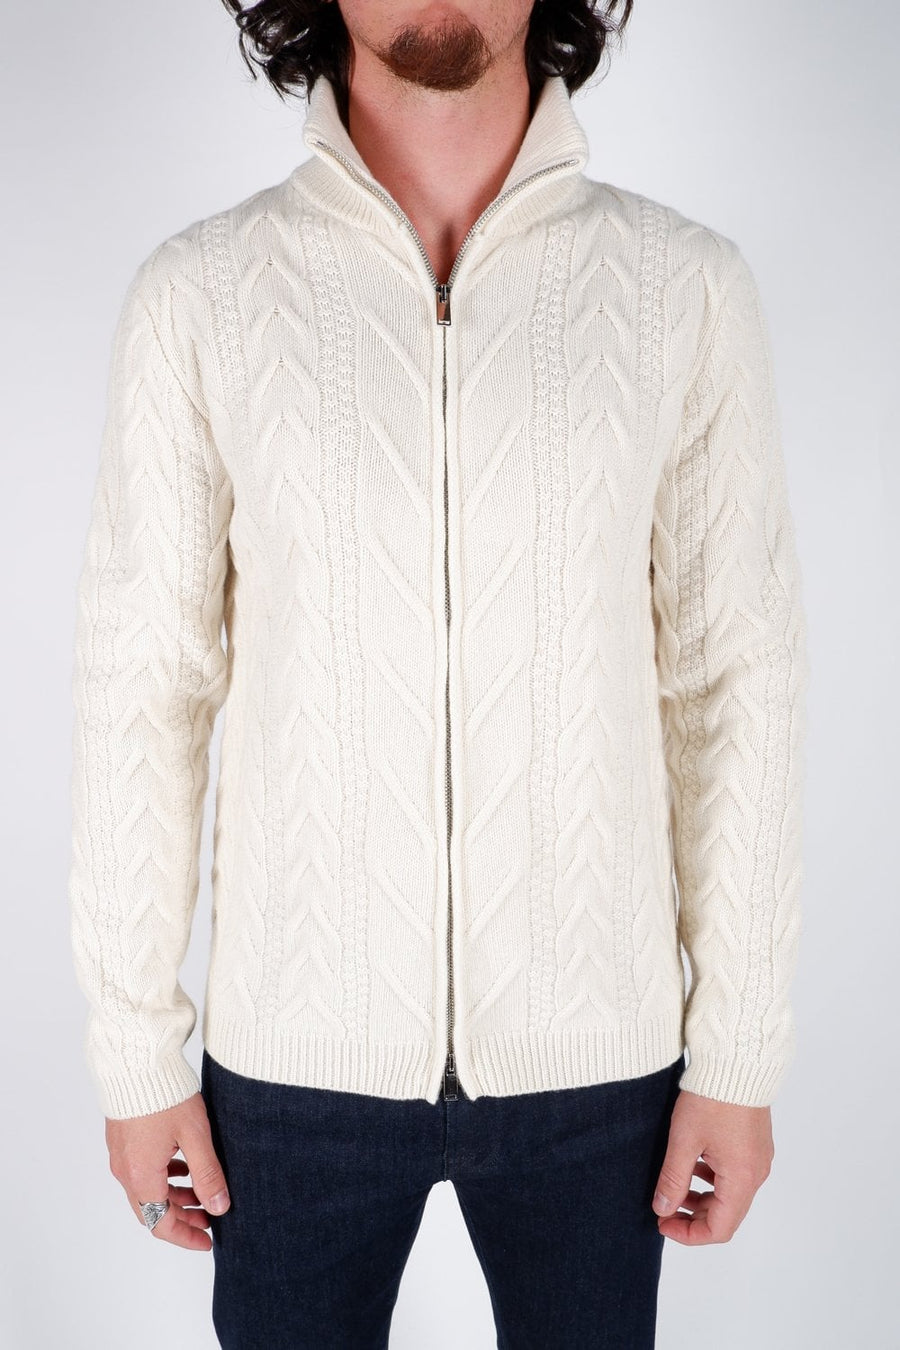 Buy the Daniele Fiesoli Zip UP Wool Cardigan in Cream at Intro. Spend £50 for free UK delivery. Official stockists. We ship worldwide.